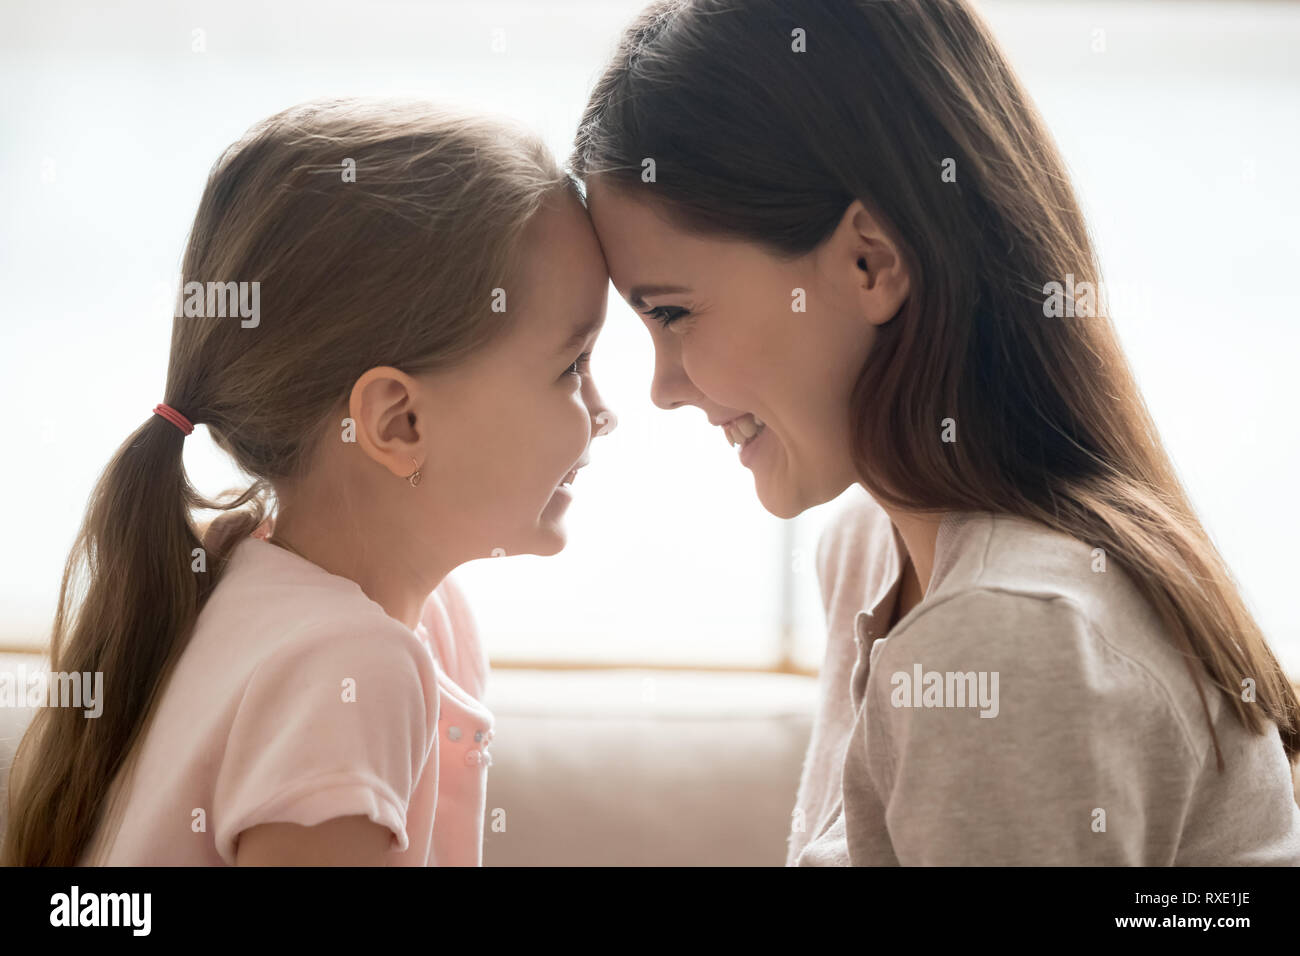 Happy kid girl and smiling mother touching foreheads, side view Stock Photo